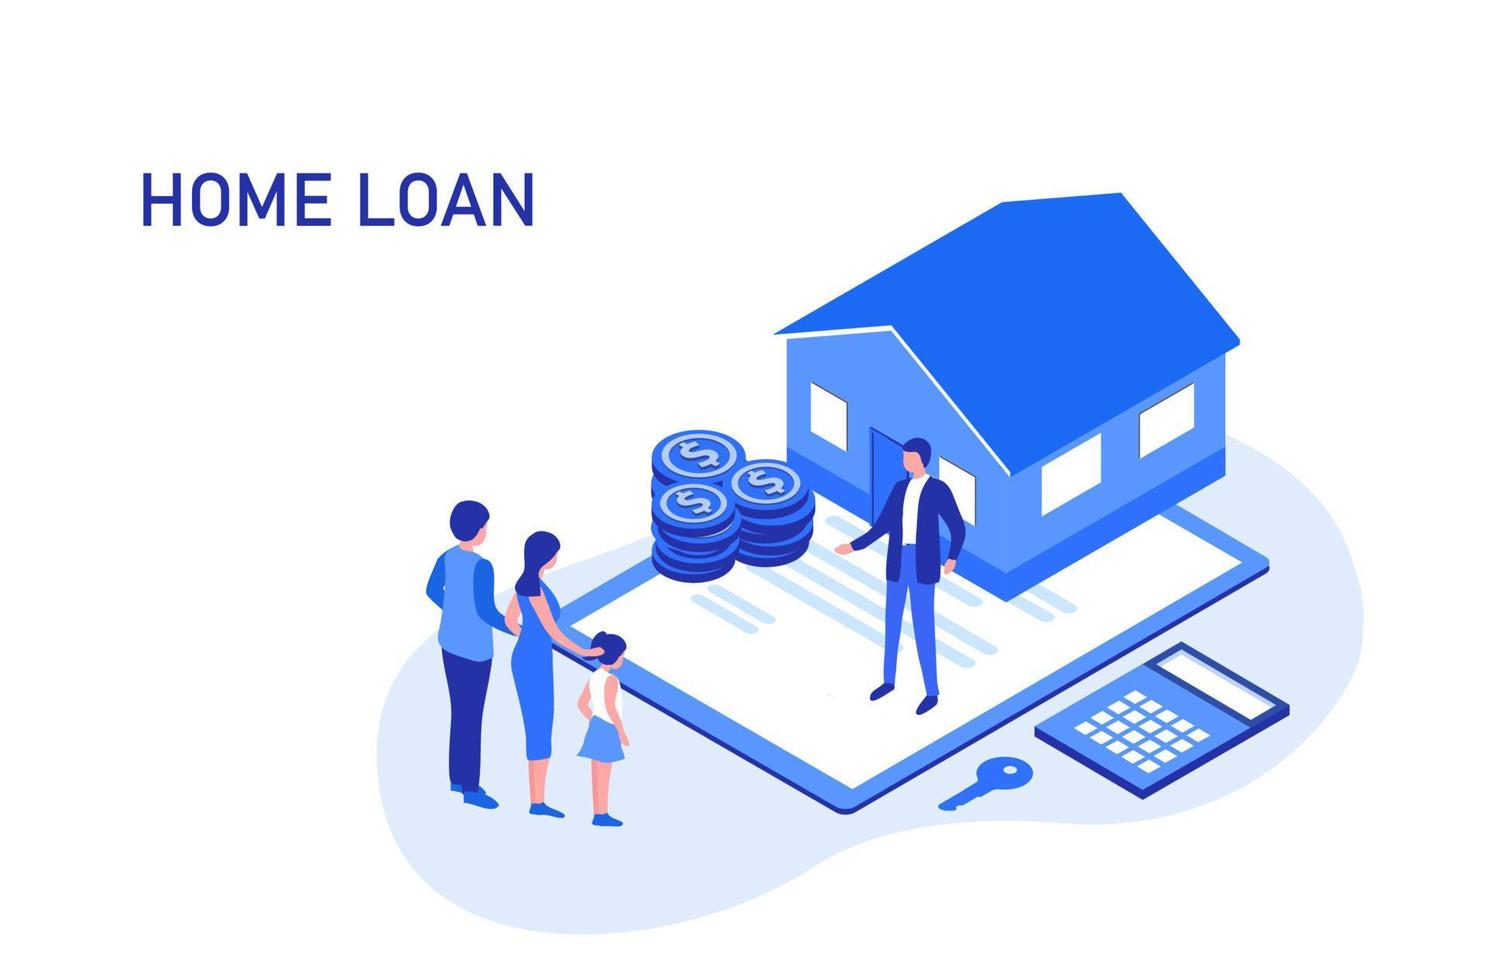 Home loan, refinance, real estate and property mortgage concept. Family with child buy home and sign  contract with banker vector illustration